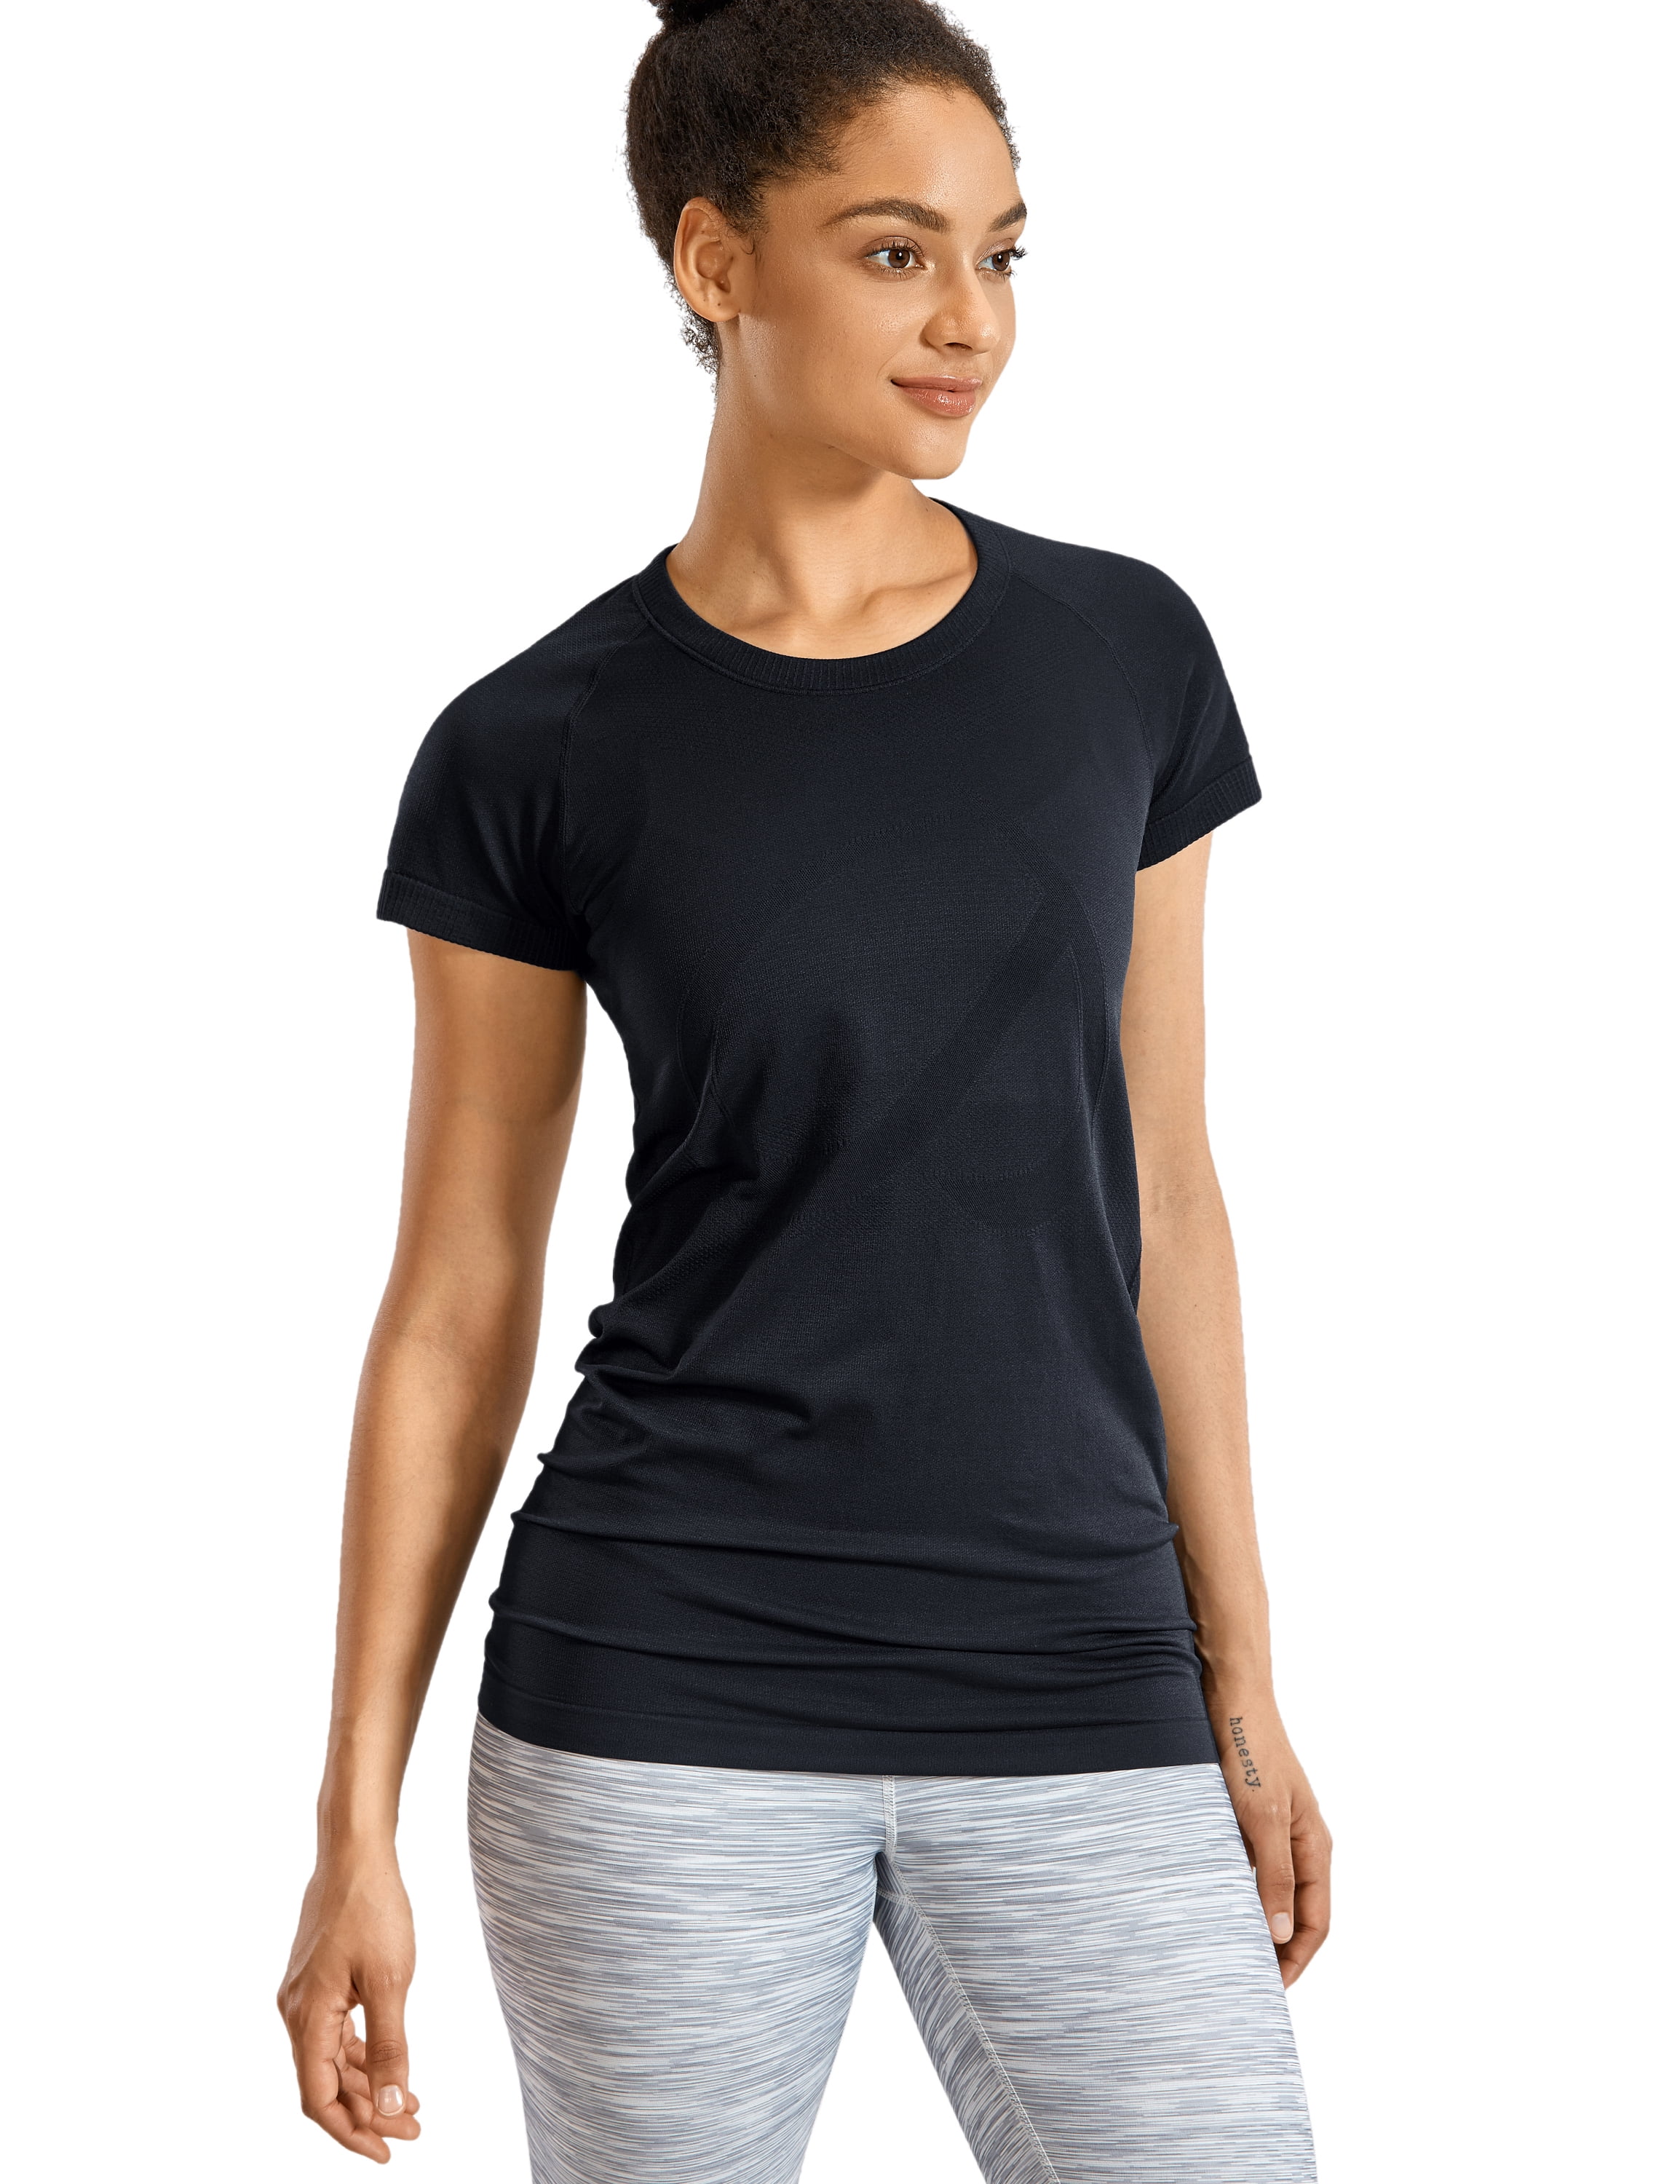 CRZ YOGA Seamless Workout Shirts for Women Short Sleeve Plain Tees Quick Dry Gym Athletic Tops 